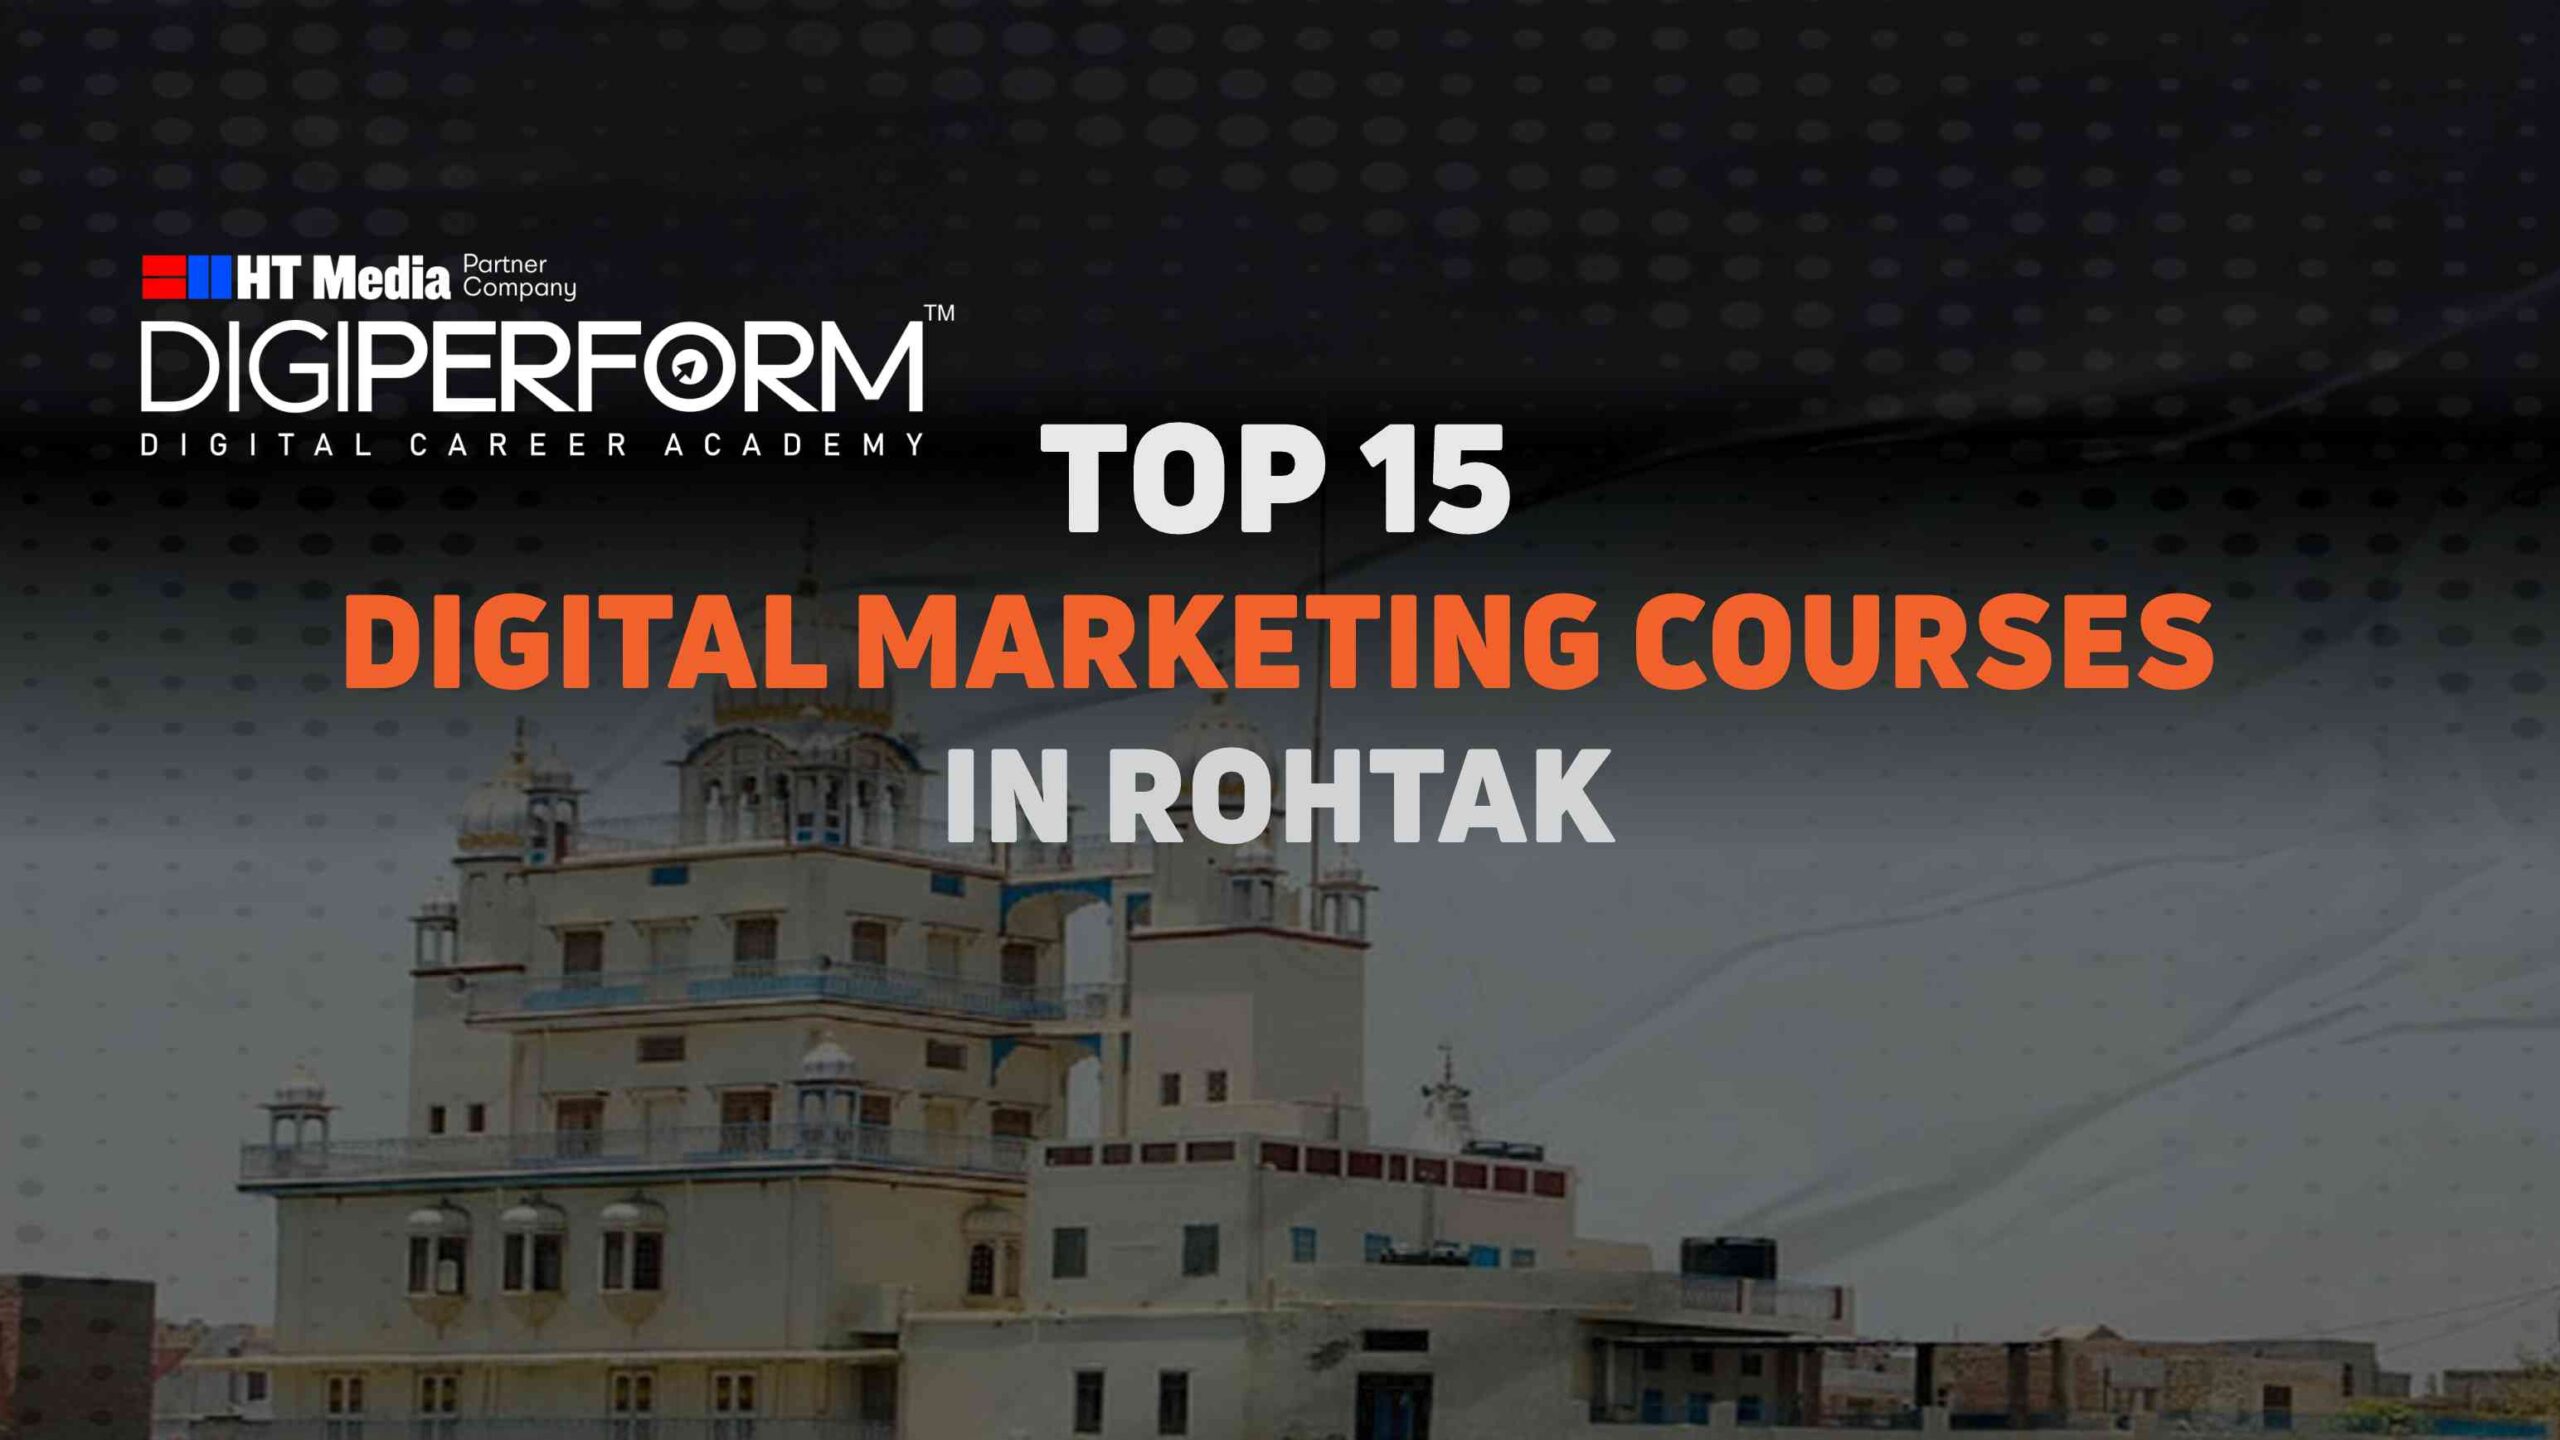 Top 15 Digital Marketing Courses in Rohtak